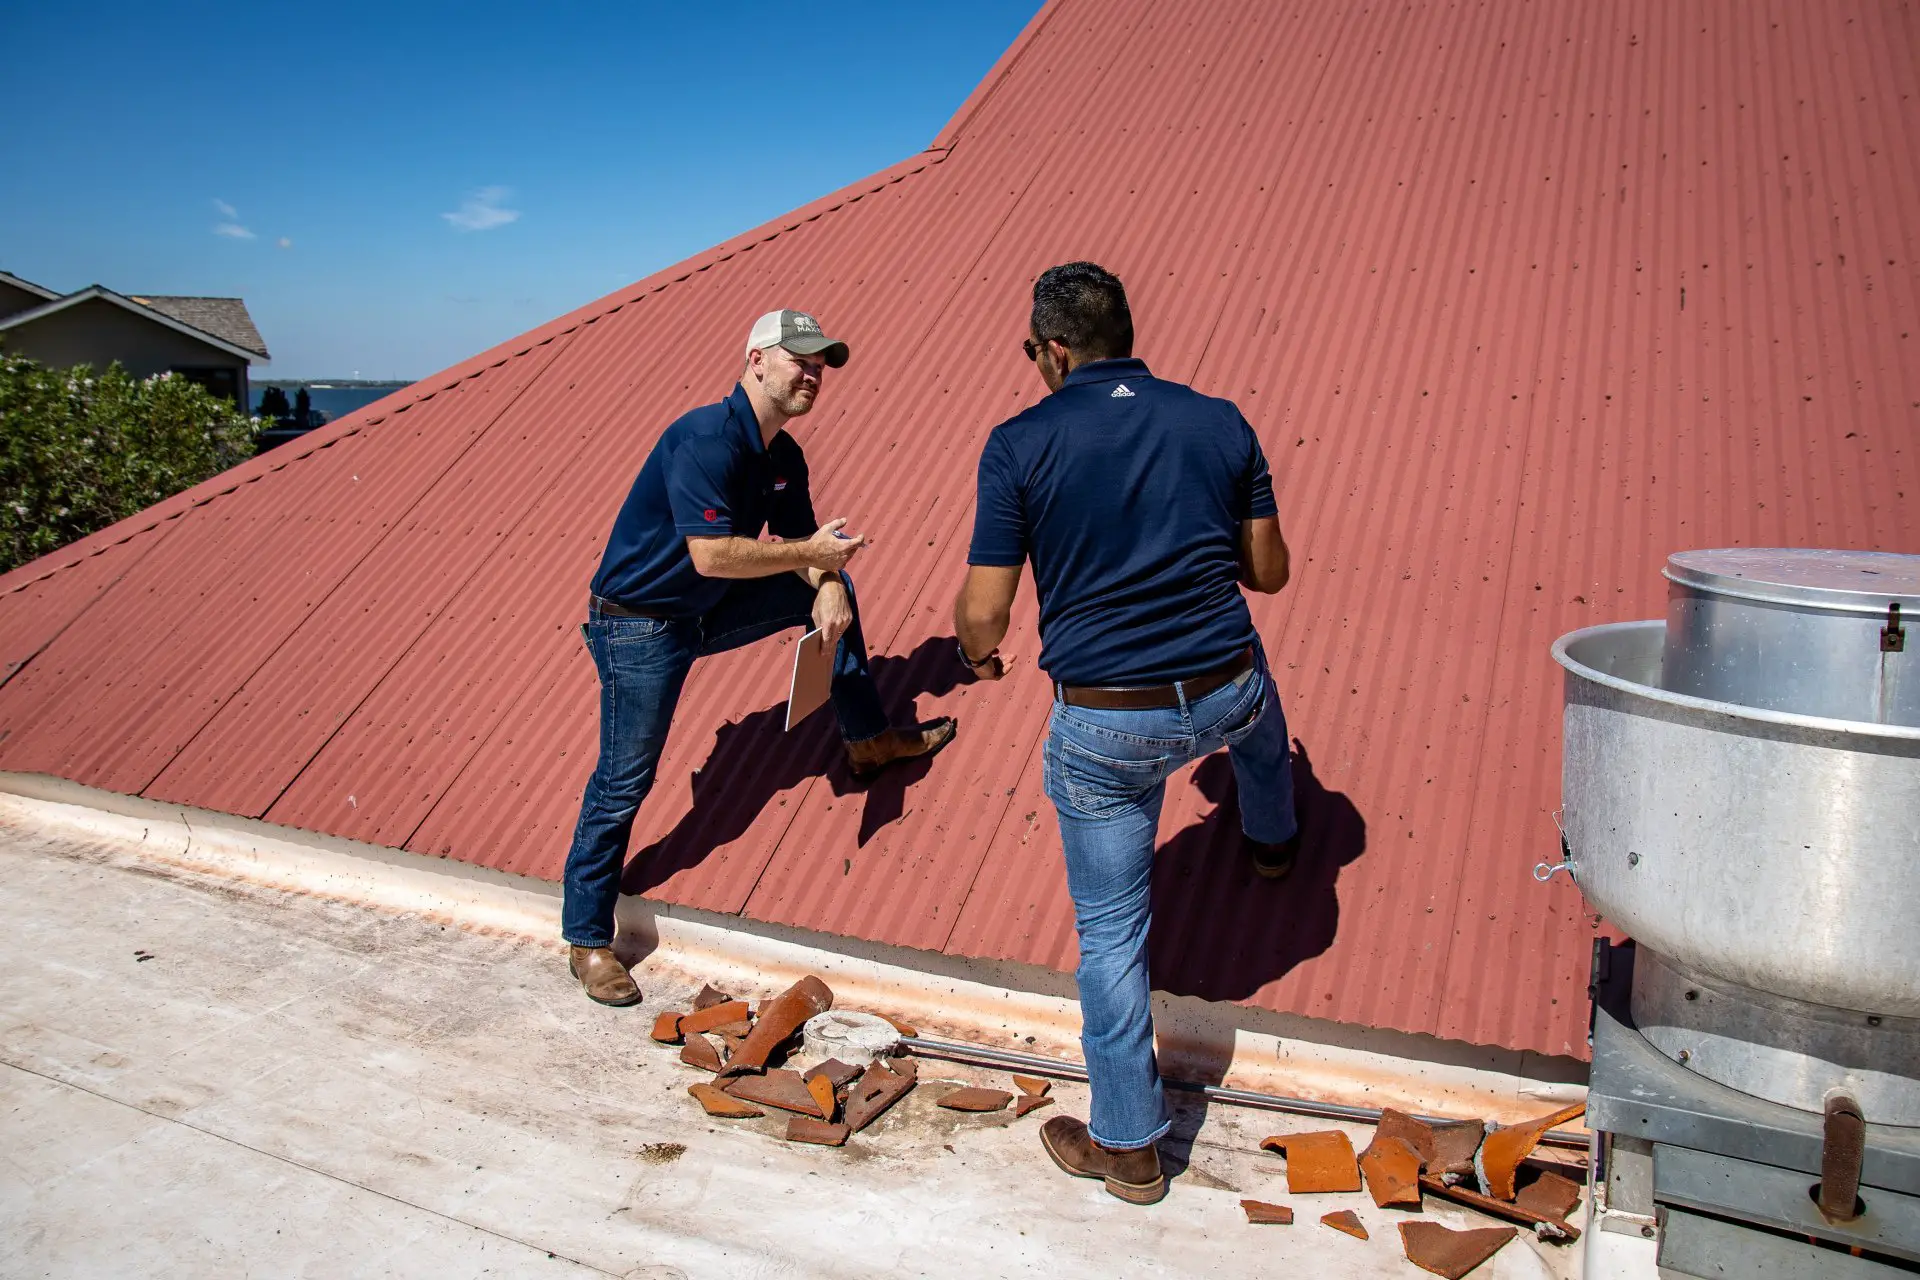 The Best 10 Questions to Ask a Roofing Contractor Before Hiring Them